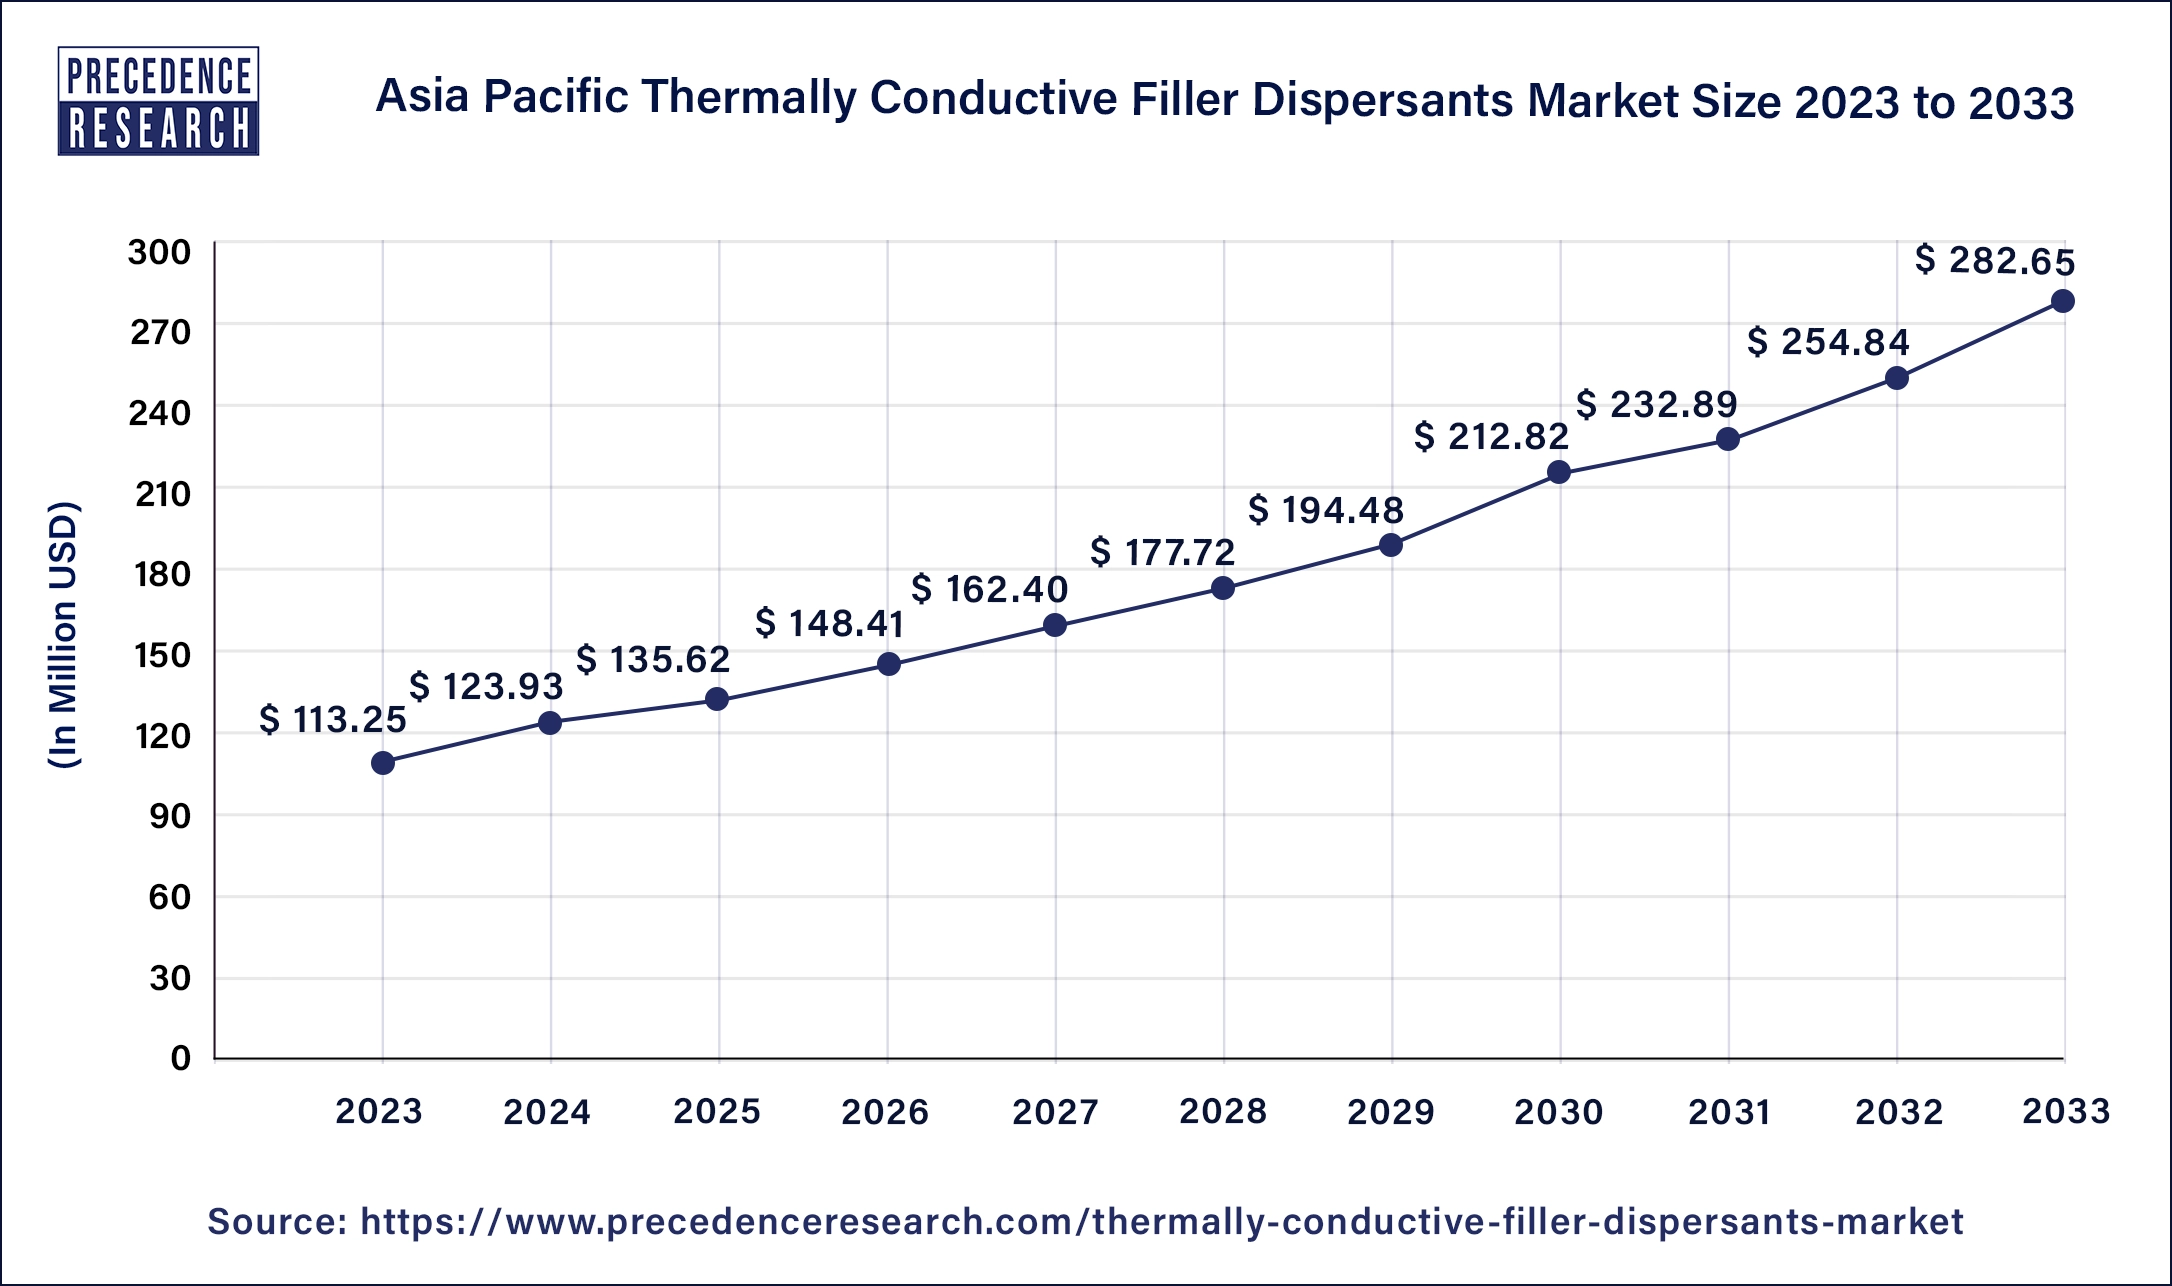 Asia Pacific Thermally Conductive Filler Dispersants Market Size 2024 to 2033